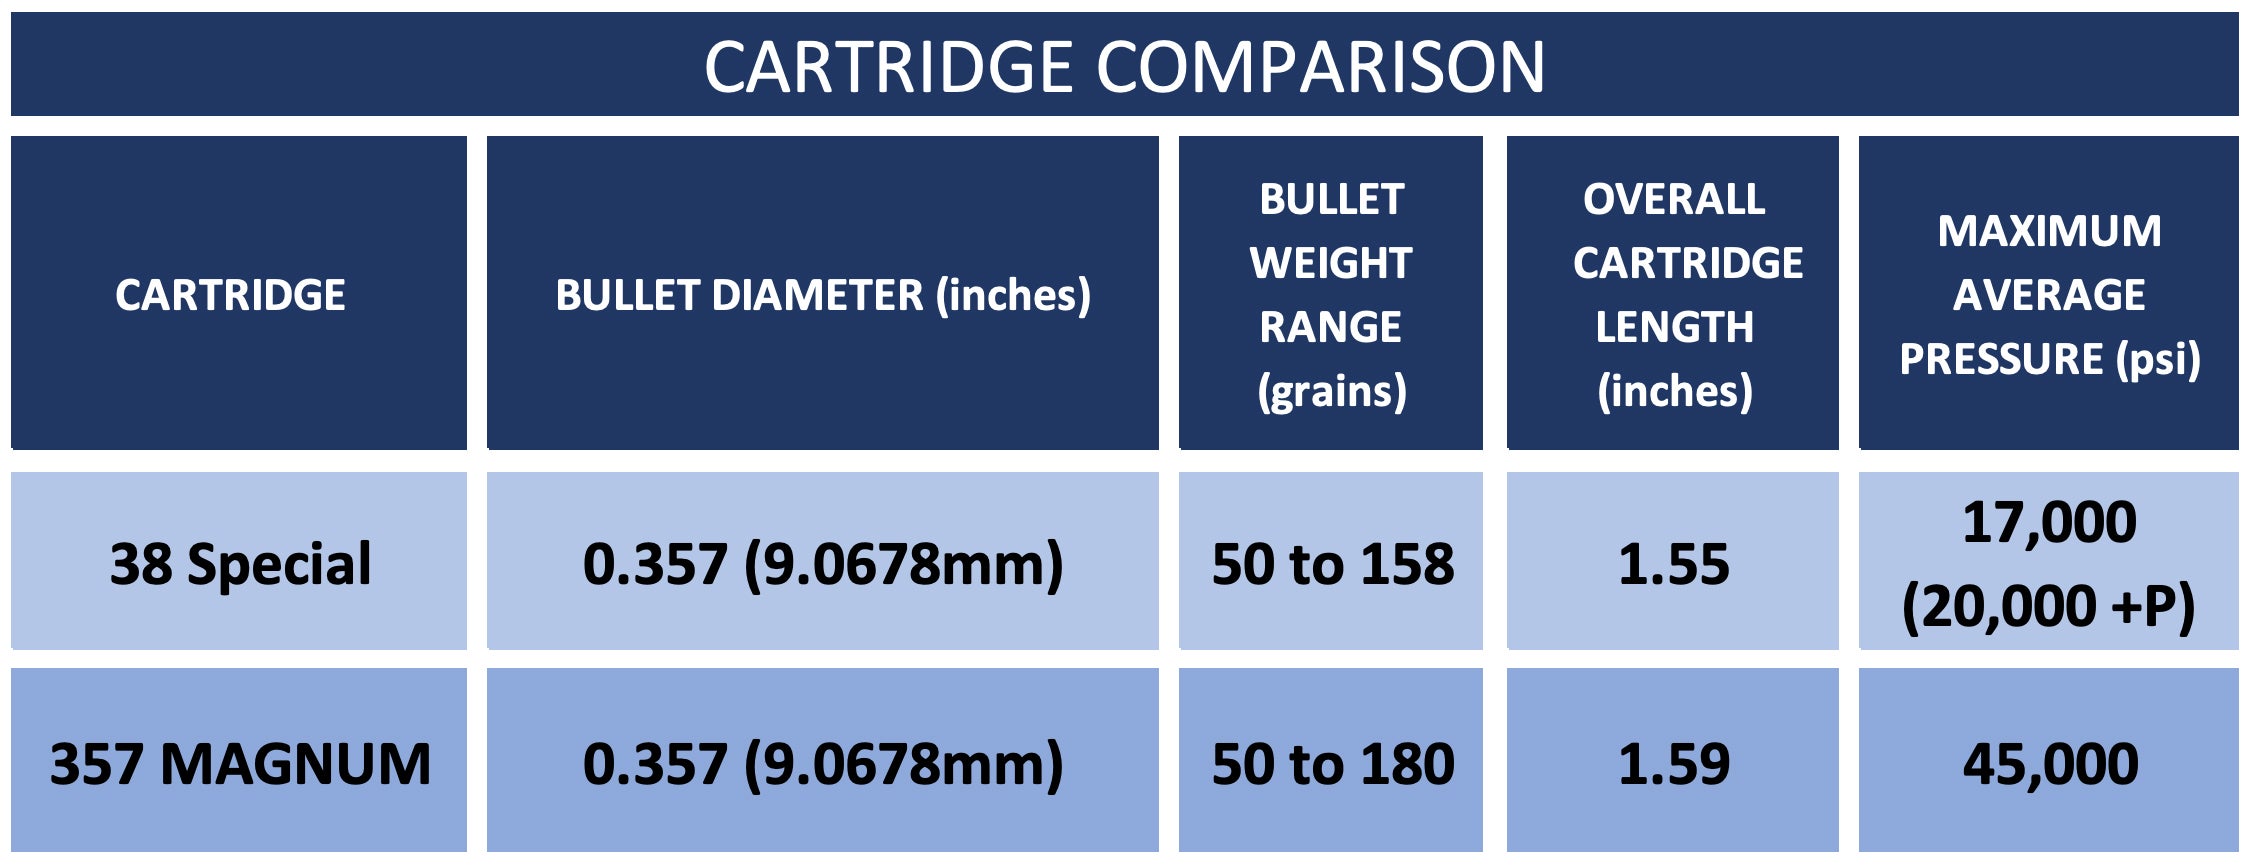 Chart showing a comparison of the 357 Magnum vs 38 Special